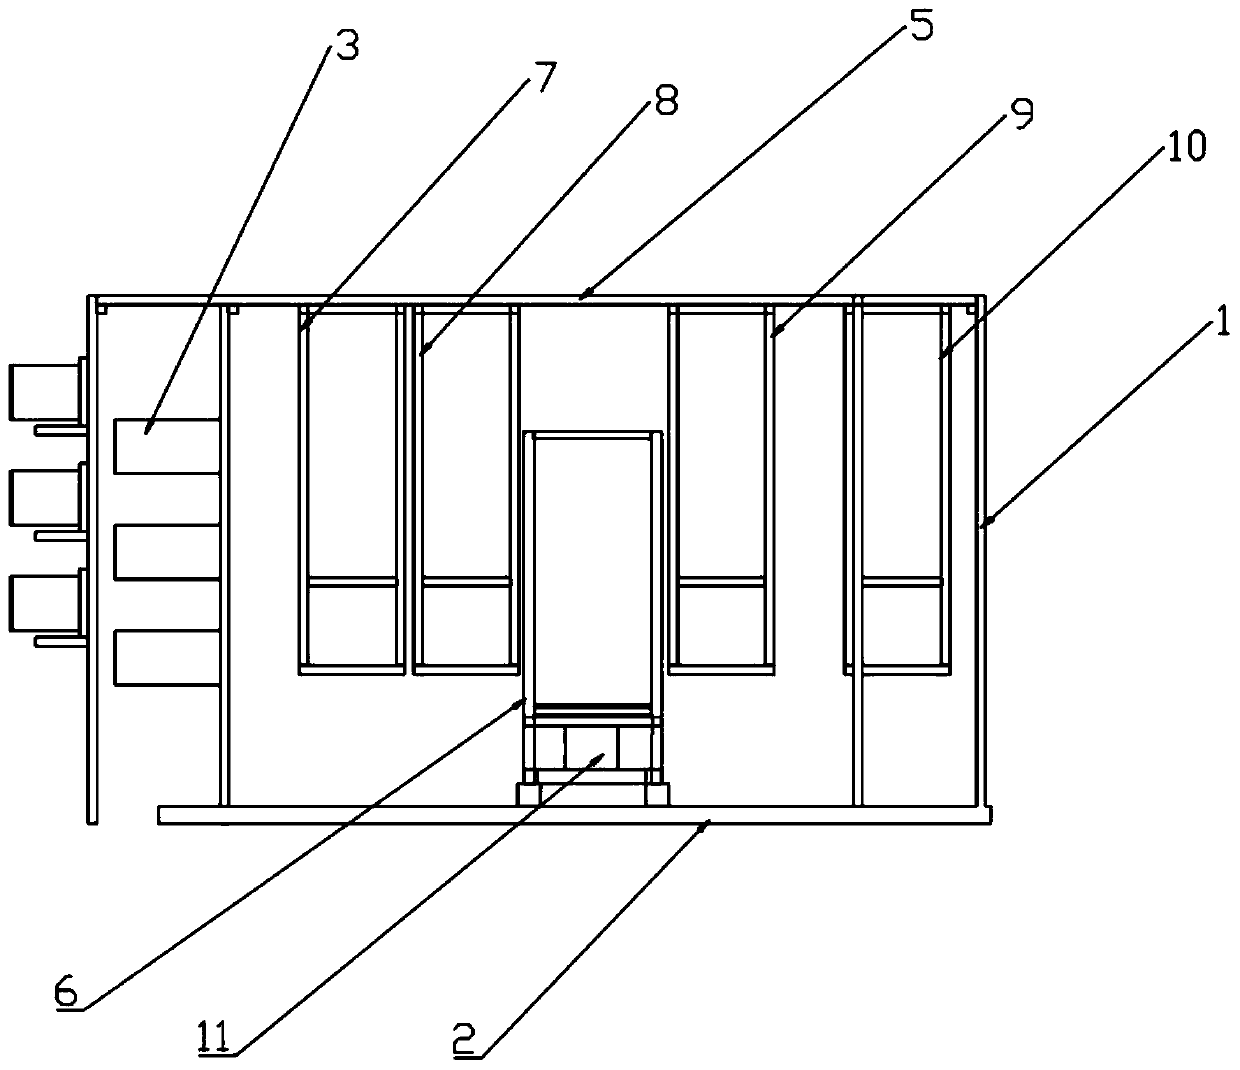 Automatic material storing and taking device